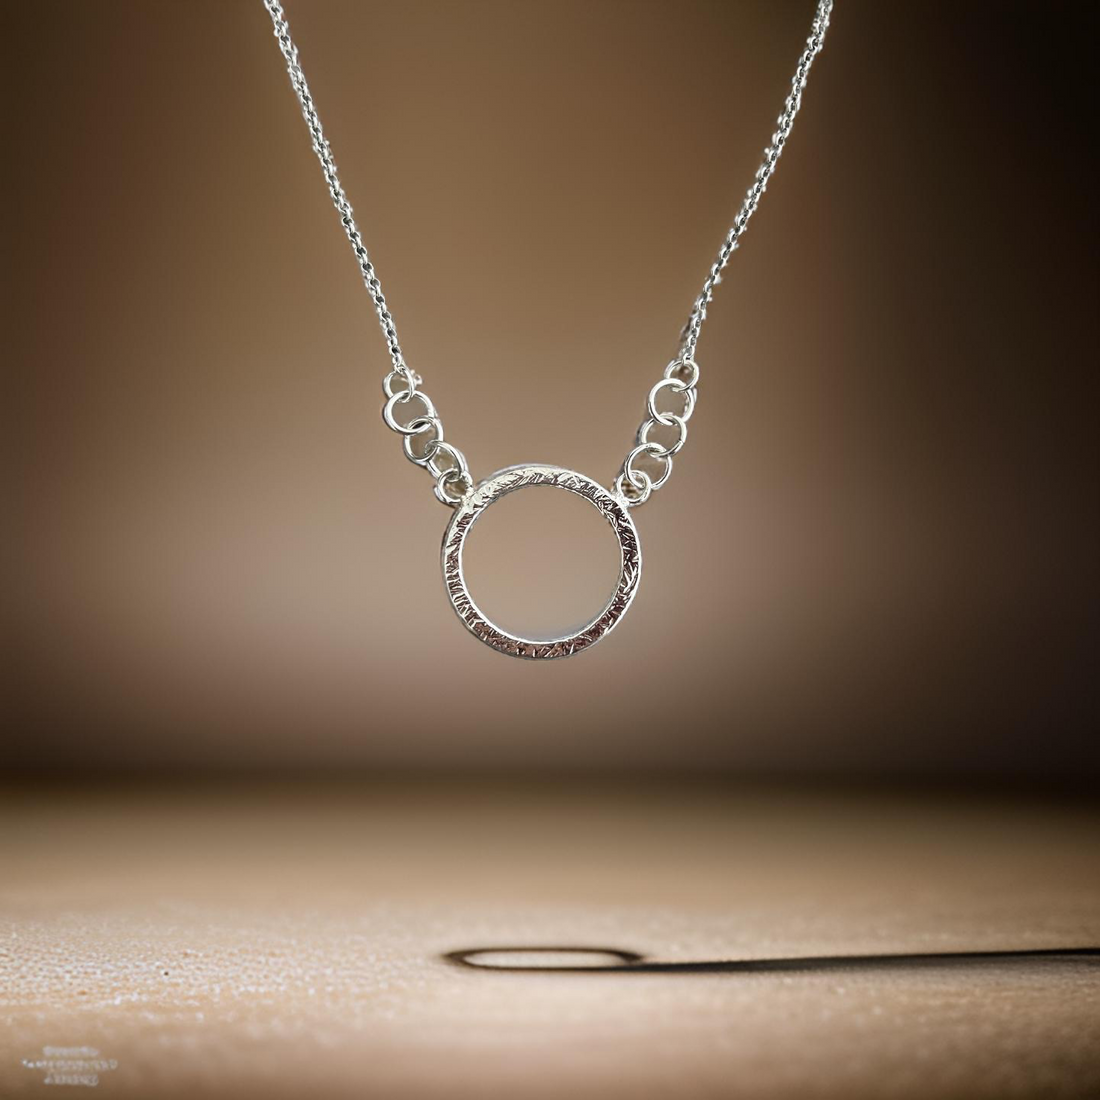 Handcrafted Sterling Silver Circle Necklace